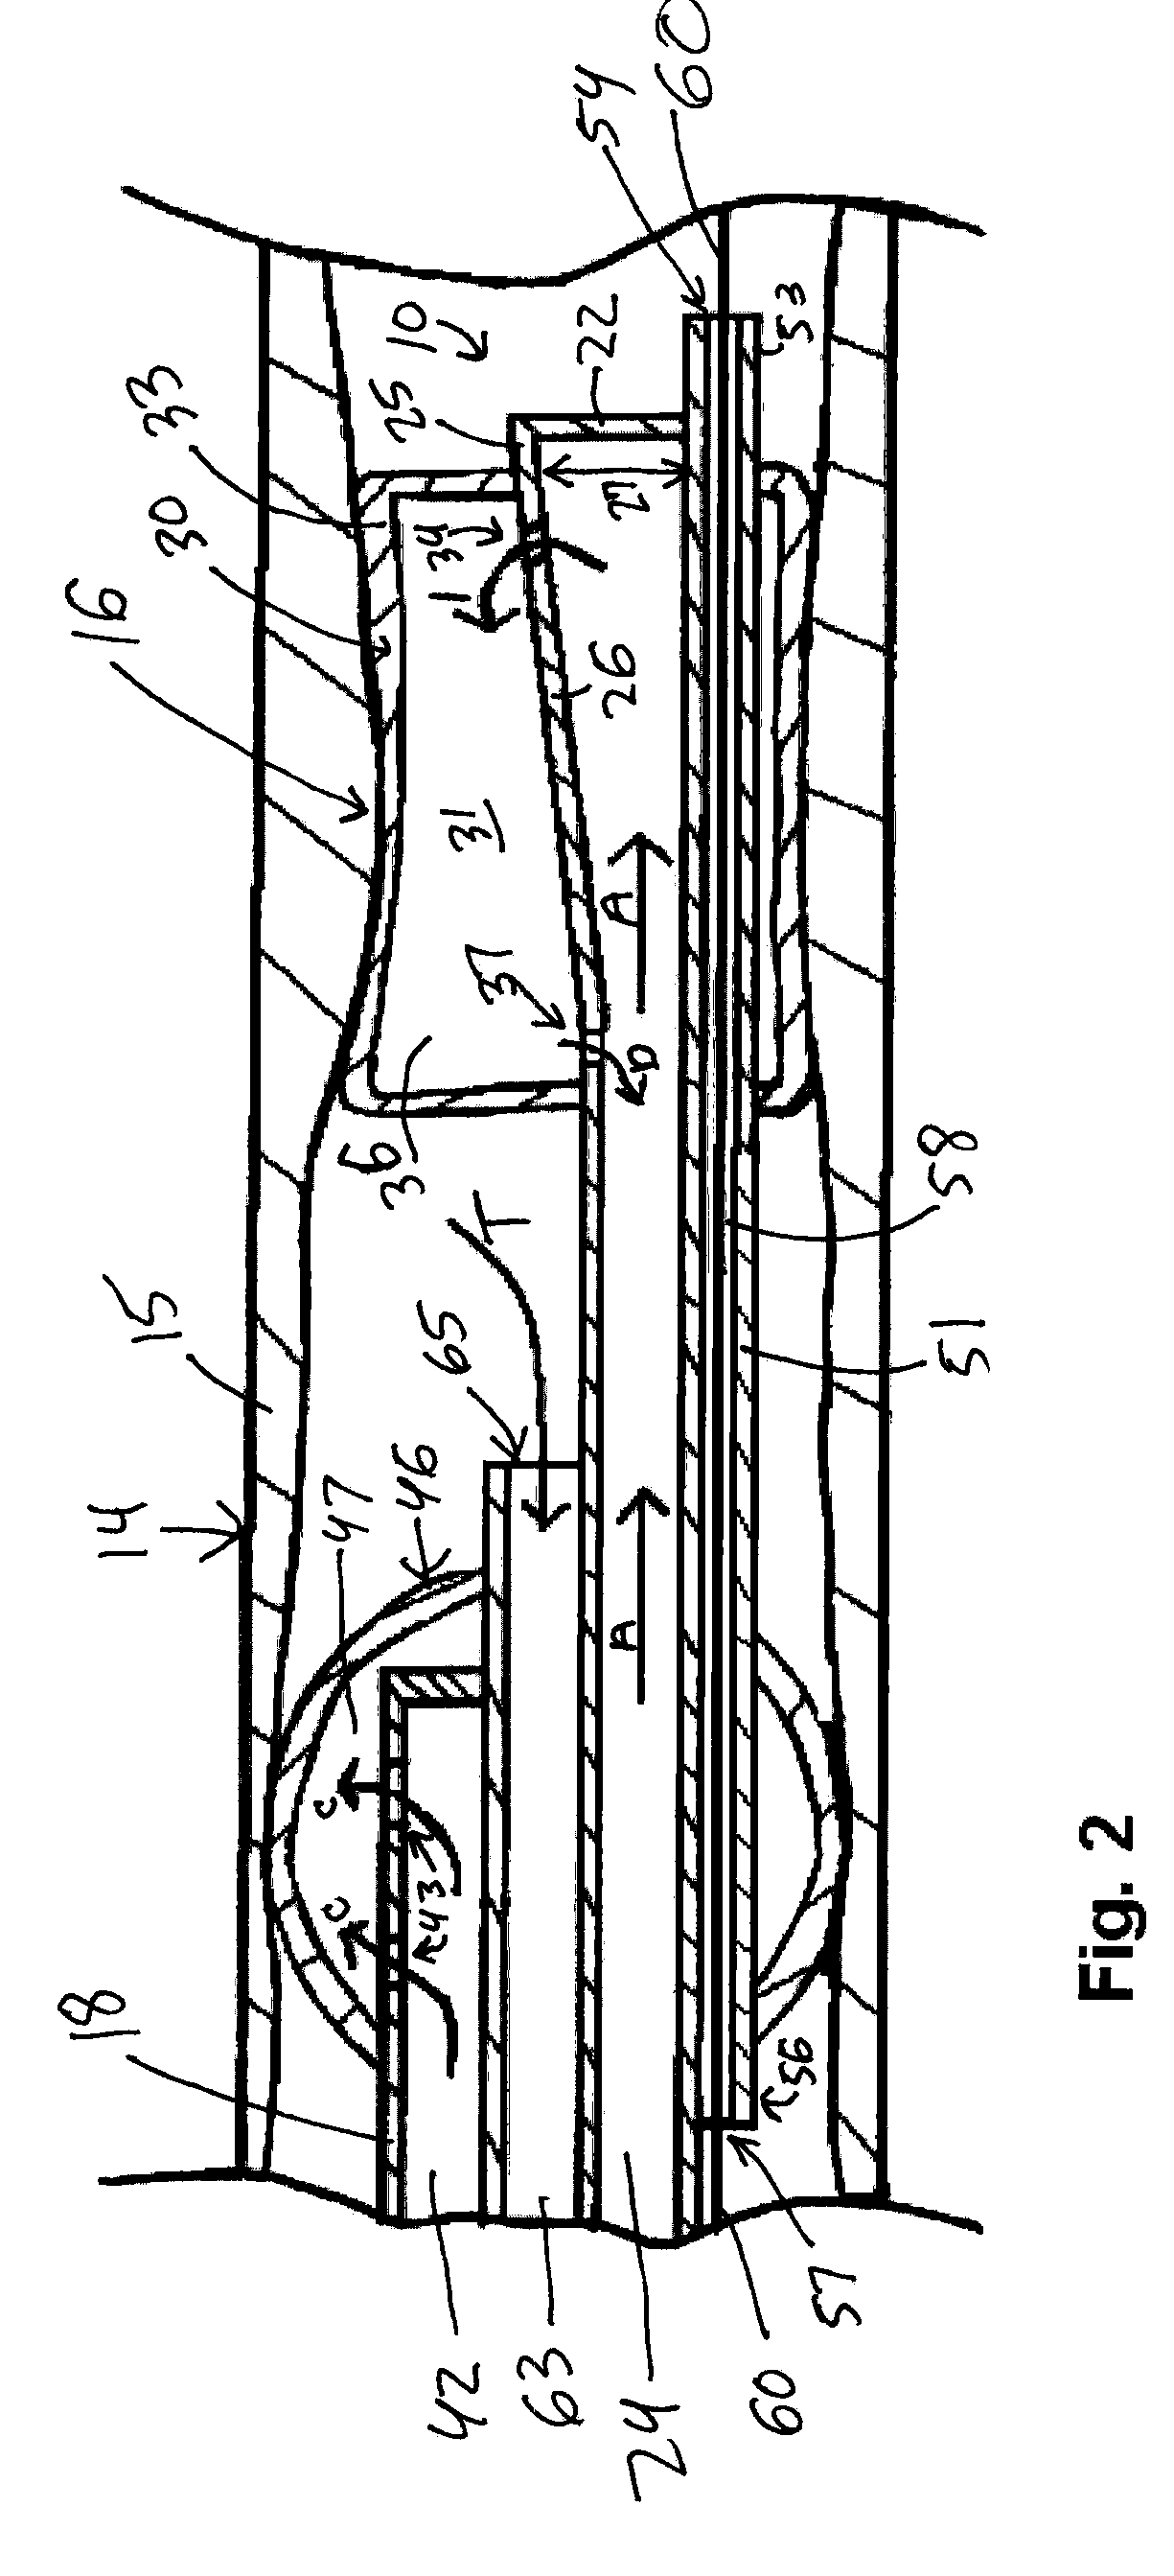 Thrombectomy and Balloon Angioplasty/Stenting Device